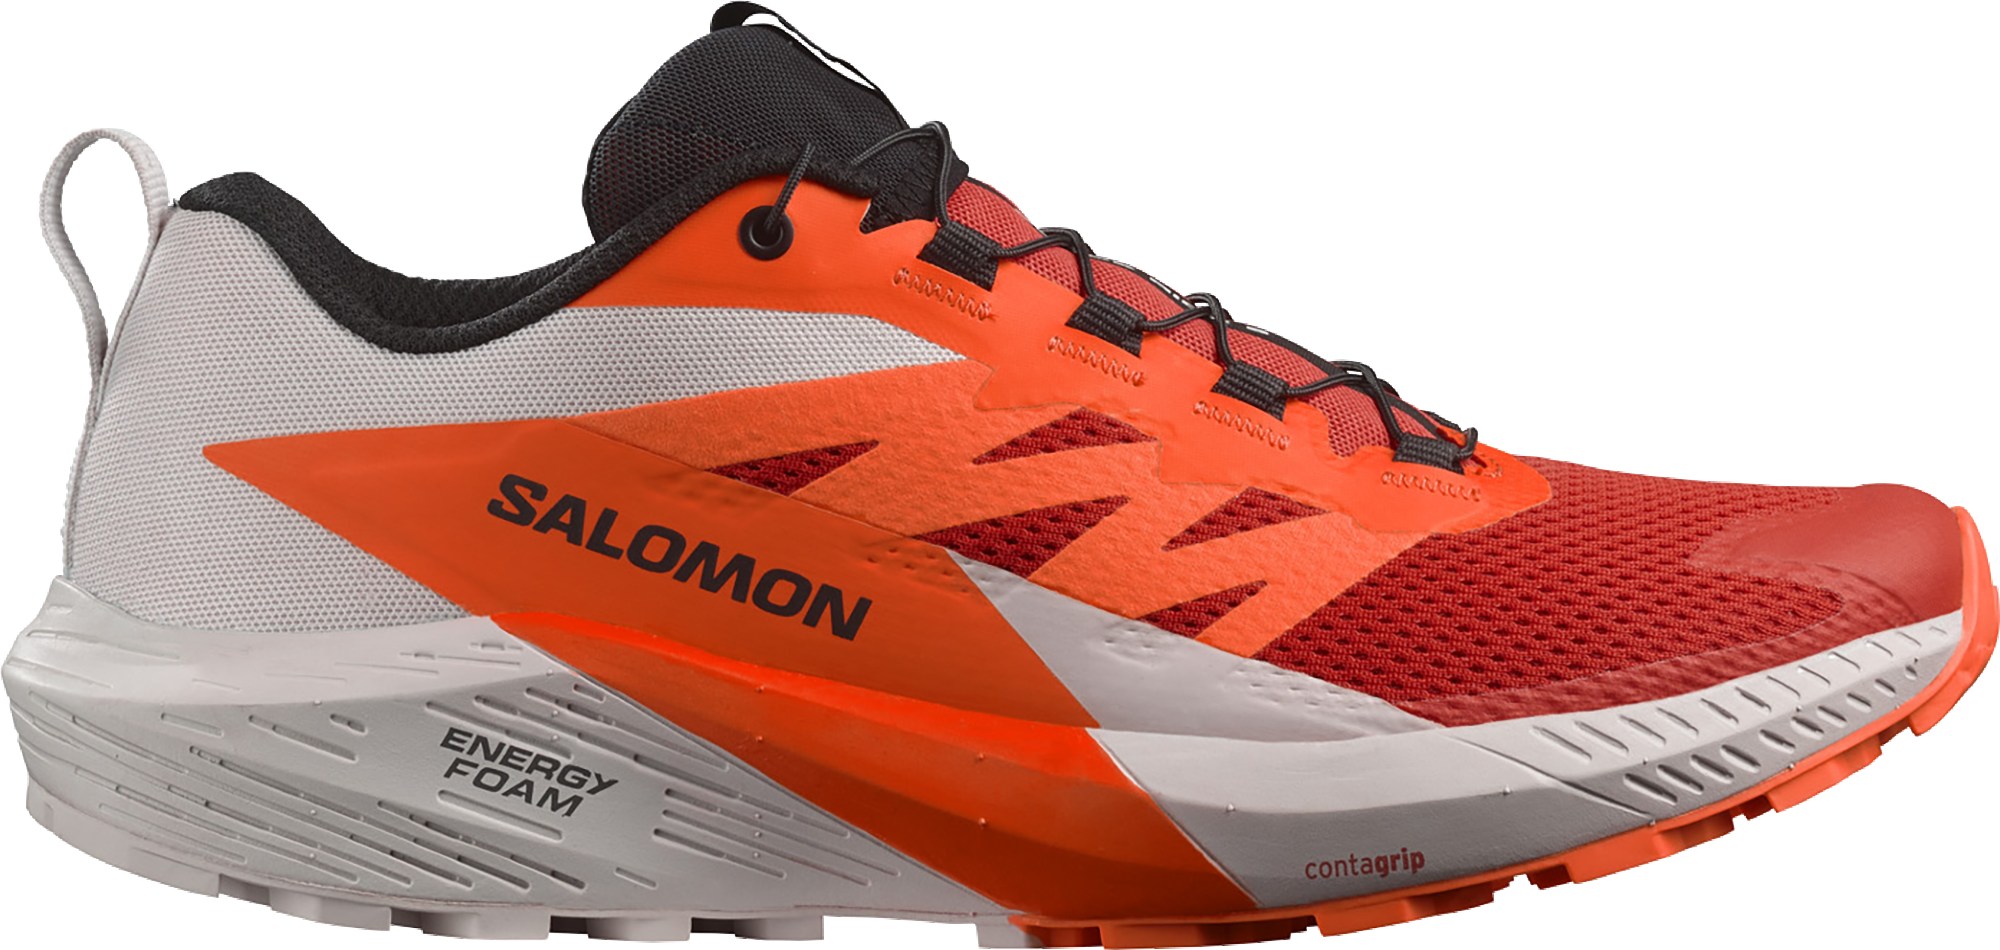 Salomon Sense Ride 5 Trail-Running Shoes Men's - (Free Shipping after $60, and Select Sizes Only) $69.83